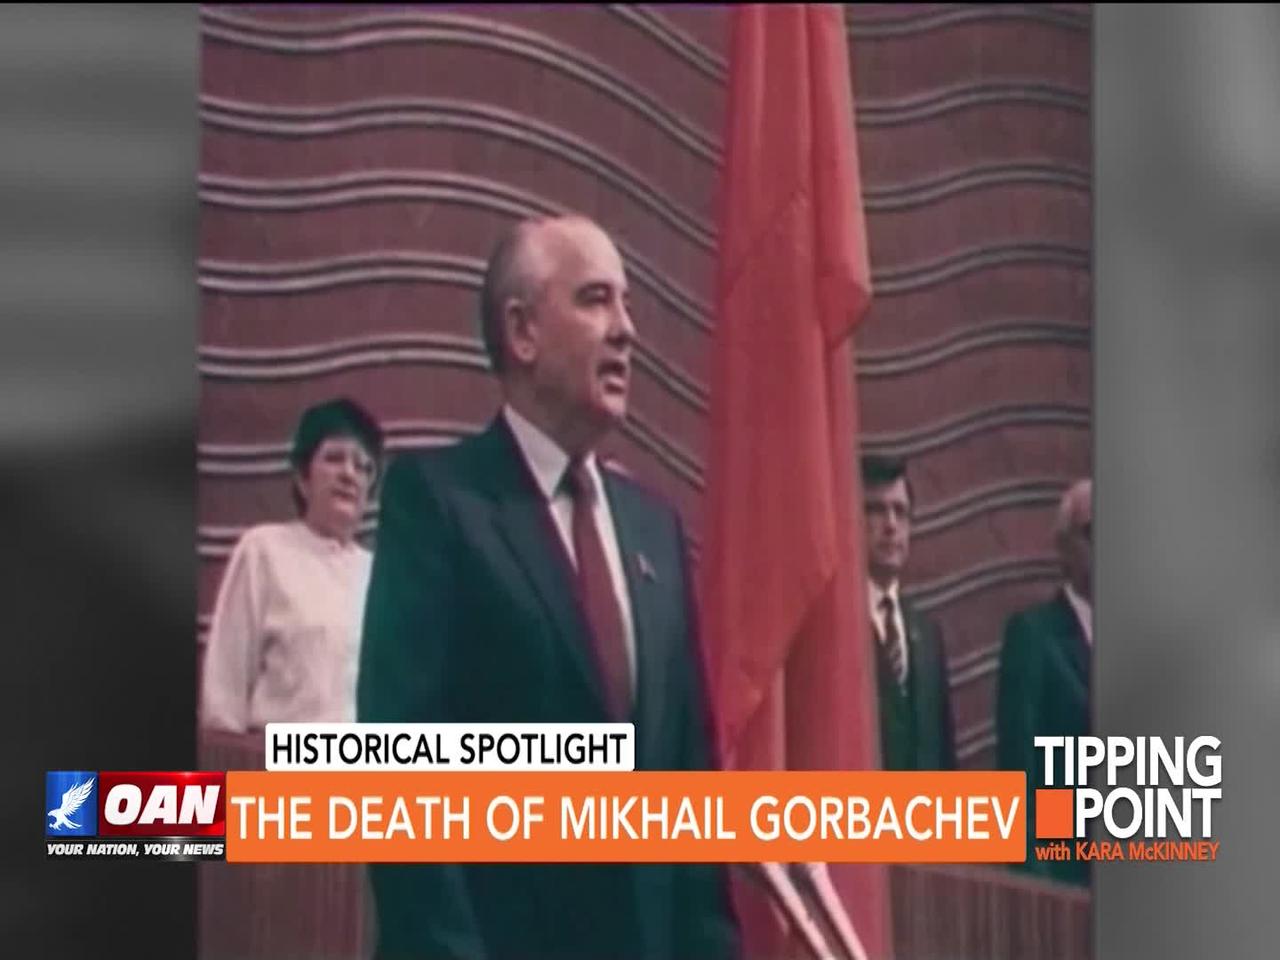 Tipping Point - The Death of Mikhail Gorbachev